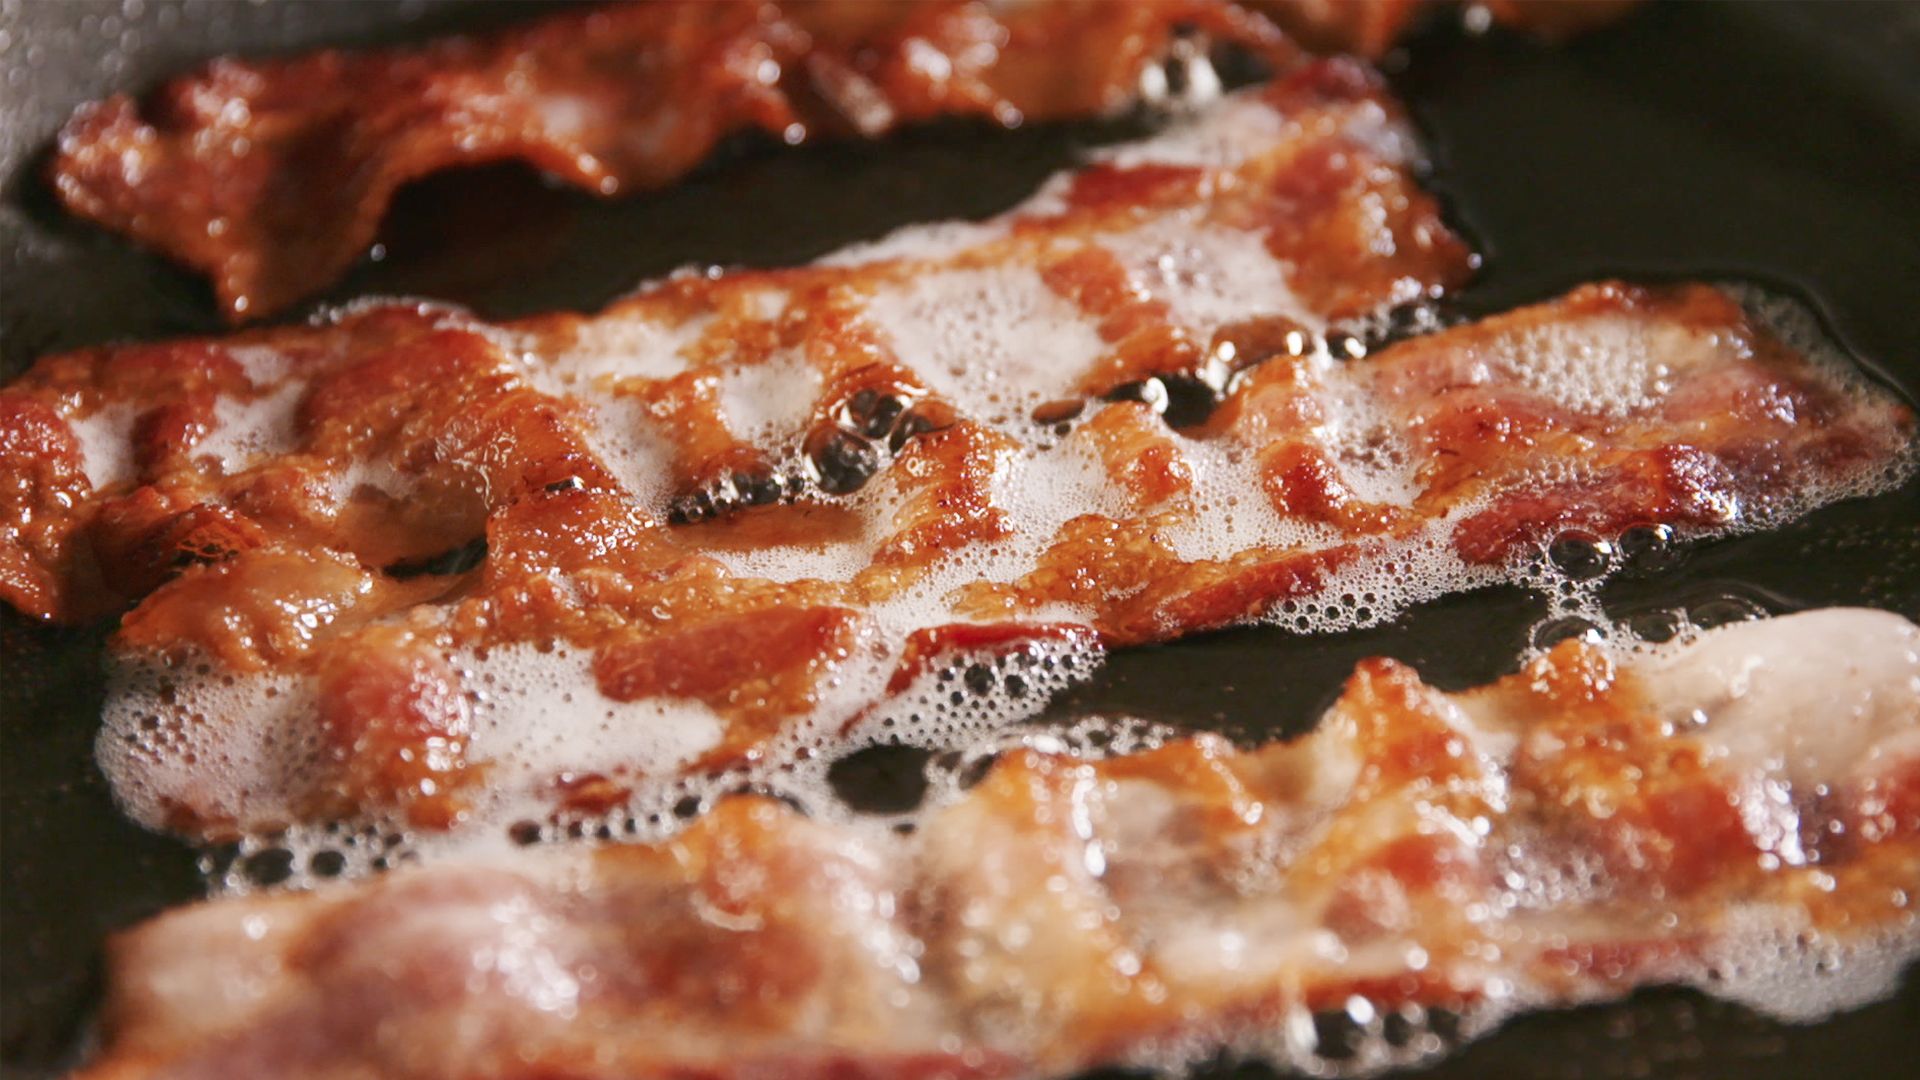 Detail Images Of Bacon Nomer 46